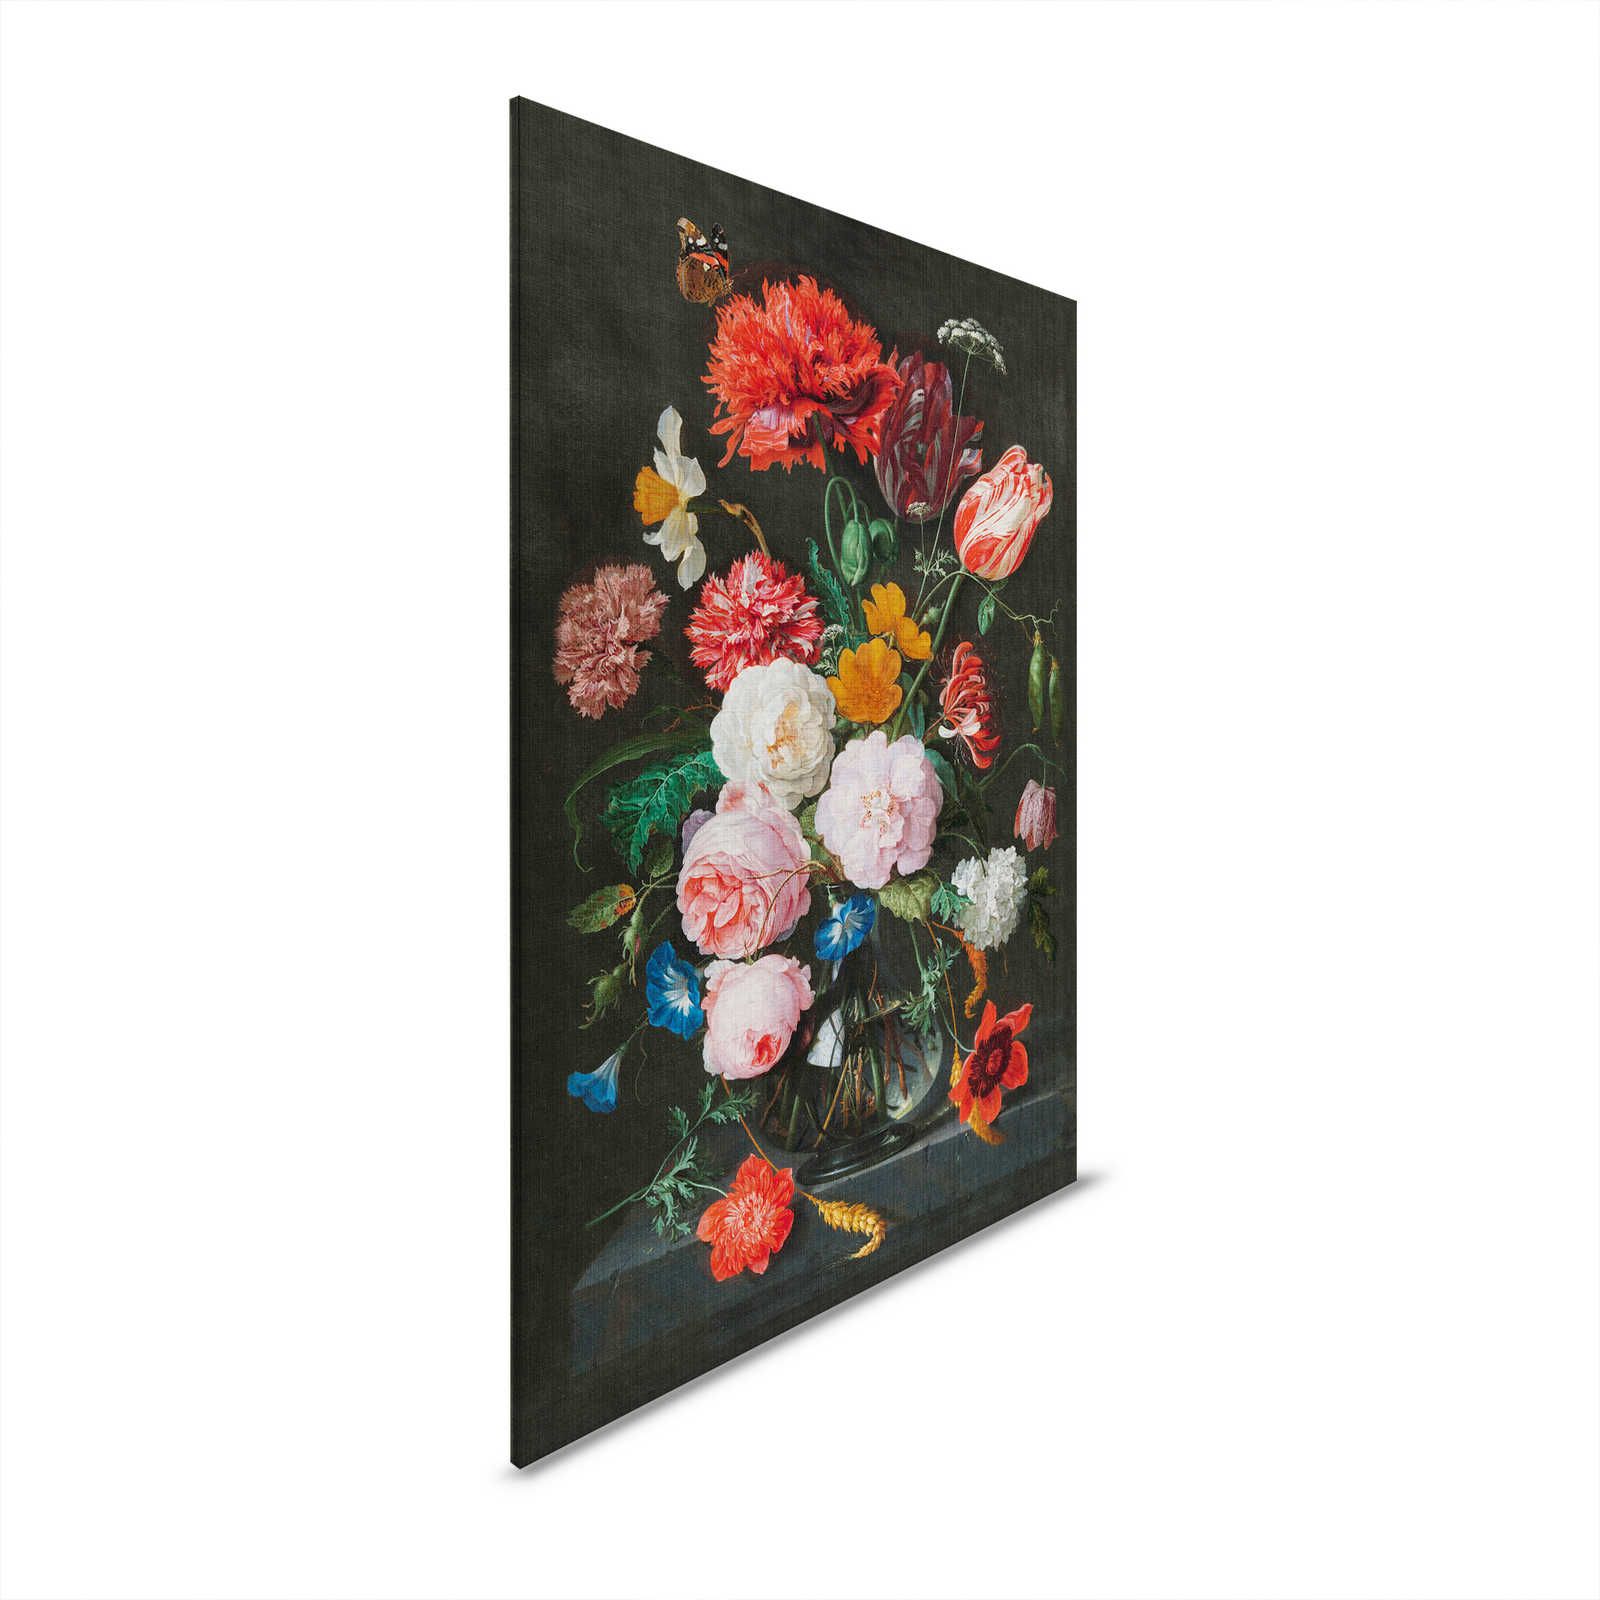 Artists Studio 4 - Canvas painting Flowers Still Life with Roses - 0,80 m x 1,20 m
